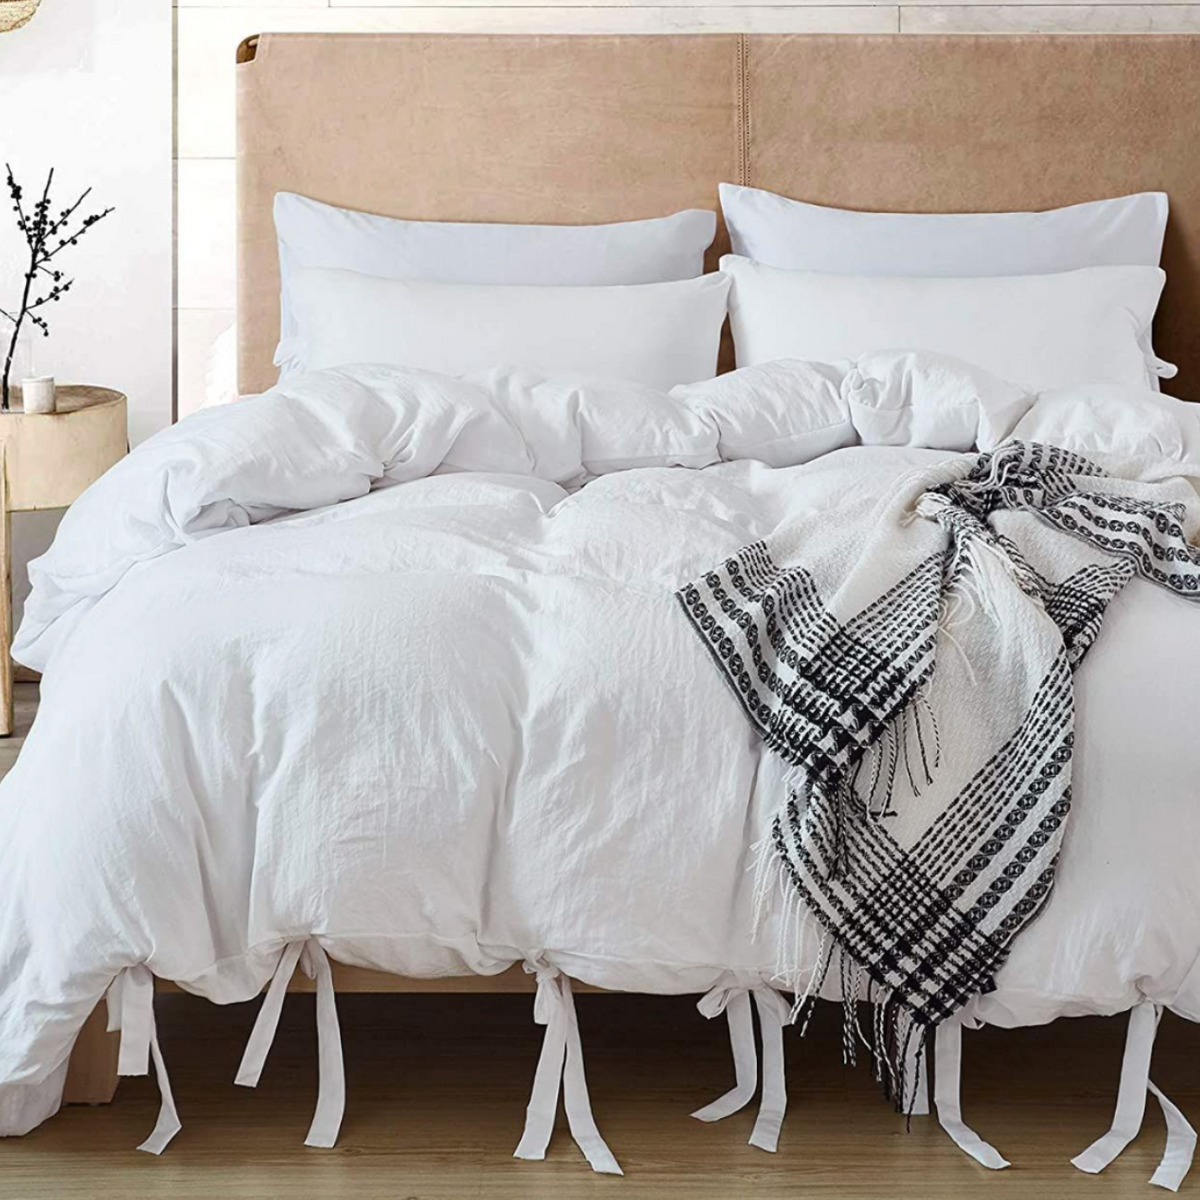 20 Best Duvet Covers 2022 The Strategist, How To Put A Duvet Cover On With Ties